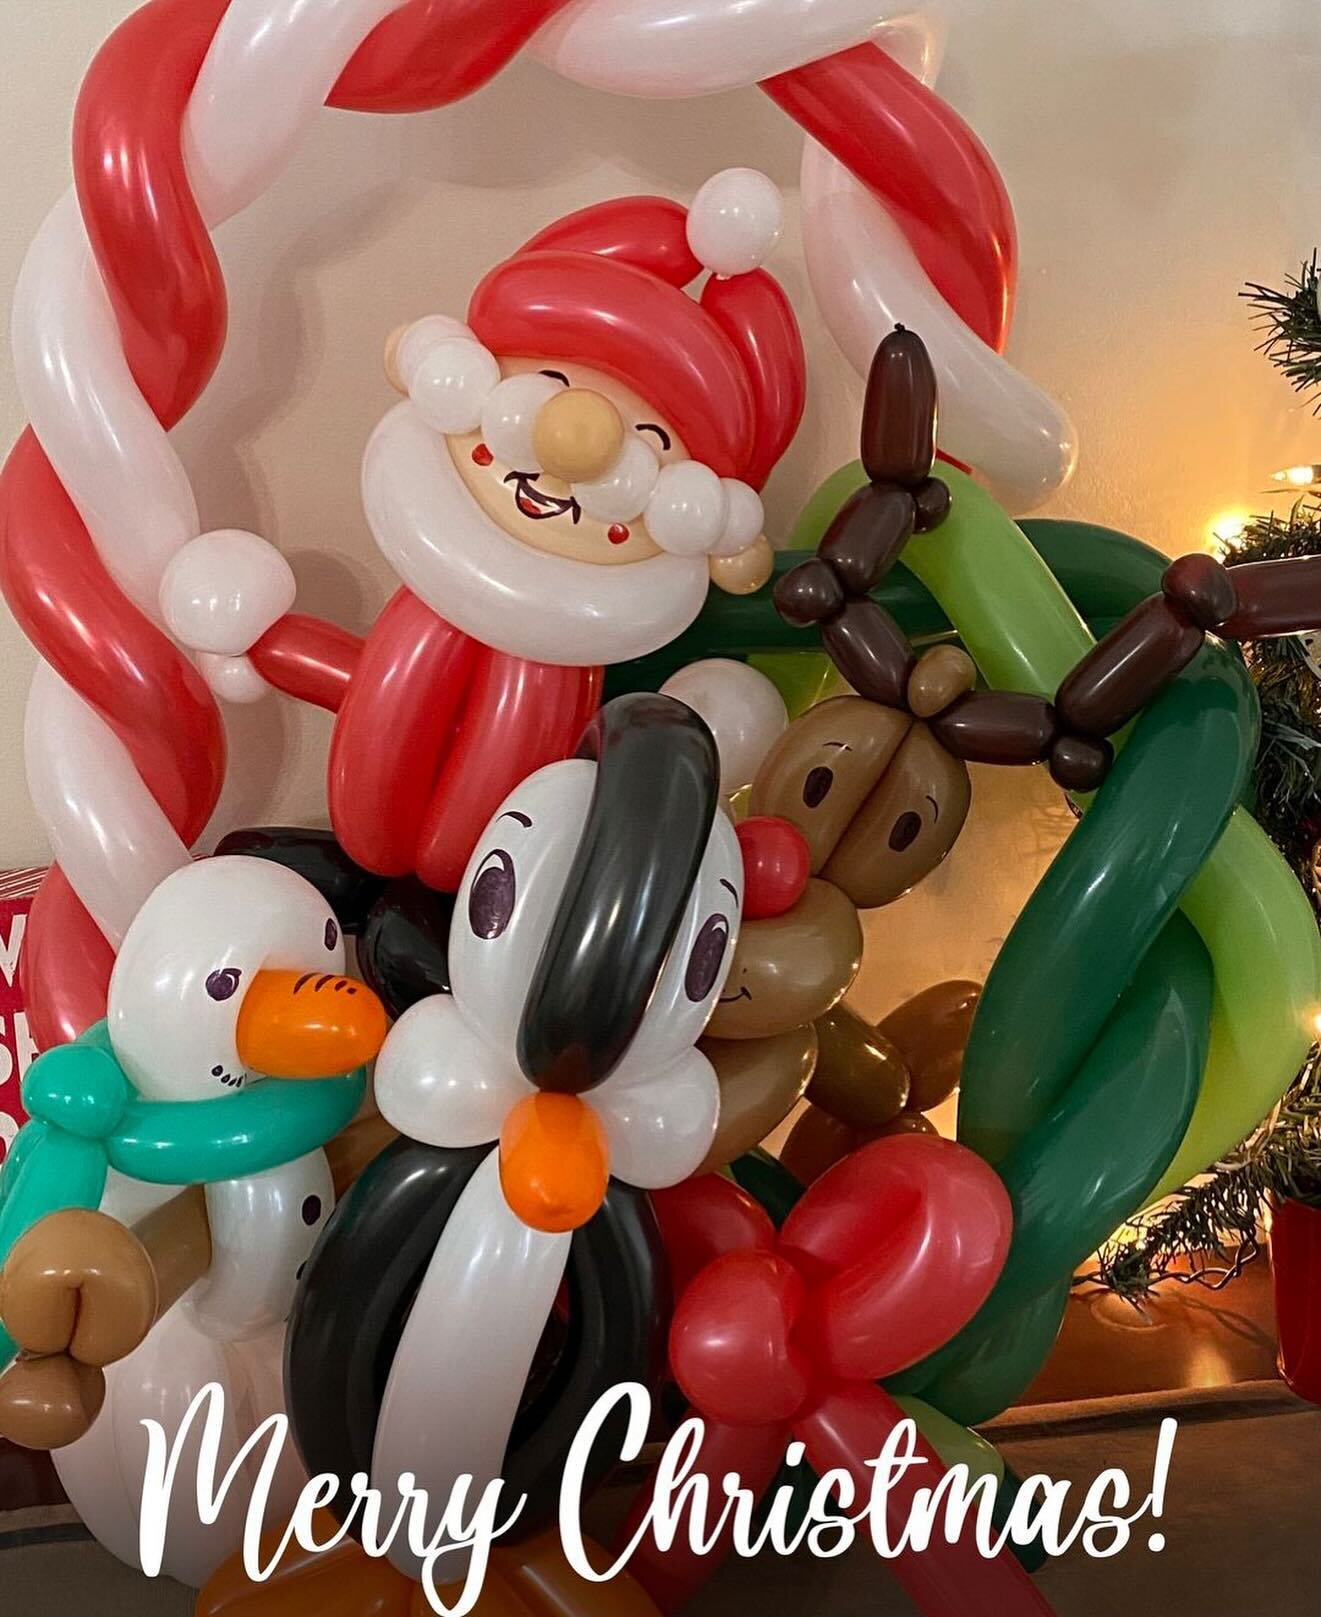 Merry Christmas to all! May your day with blessed with love &amp; joy! 
🙏🏻💚❤️
#balloons #balloontwisting #balloontwister#balloonartist #balloontwisting #entertainment #partyentertainer #southnjentertainer #bestofgloucestercounty